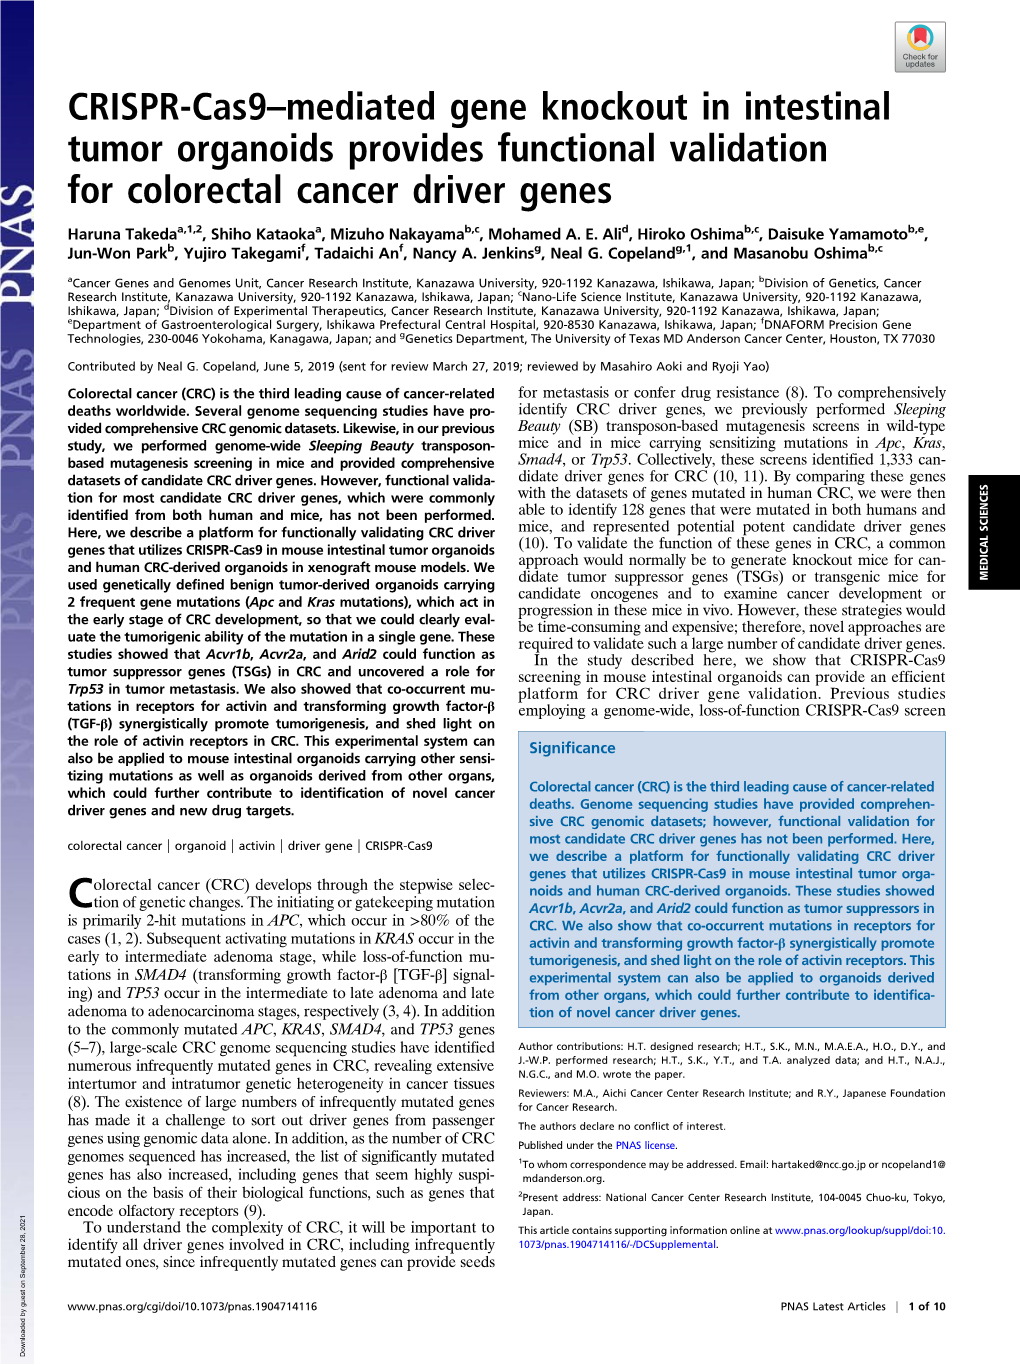 CRISPR-Cas9–Mediated Gene Knockout in Intestinal Tumor Organoids Provides Functional Validation for Colorectal Cancer Driver Genes